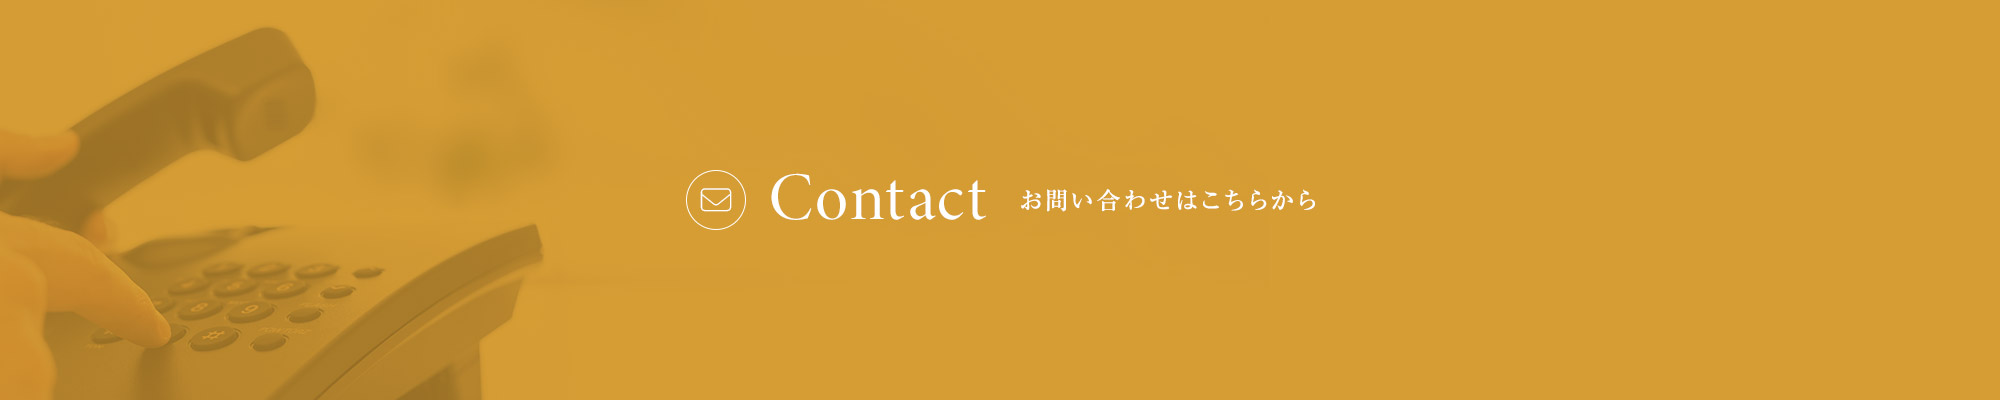 bnr_common_contact_off